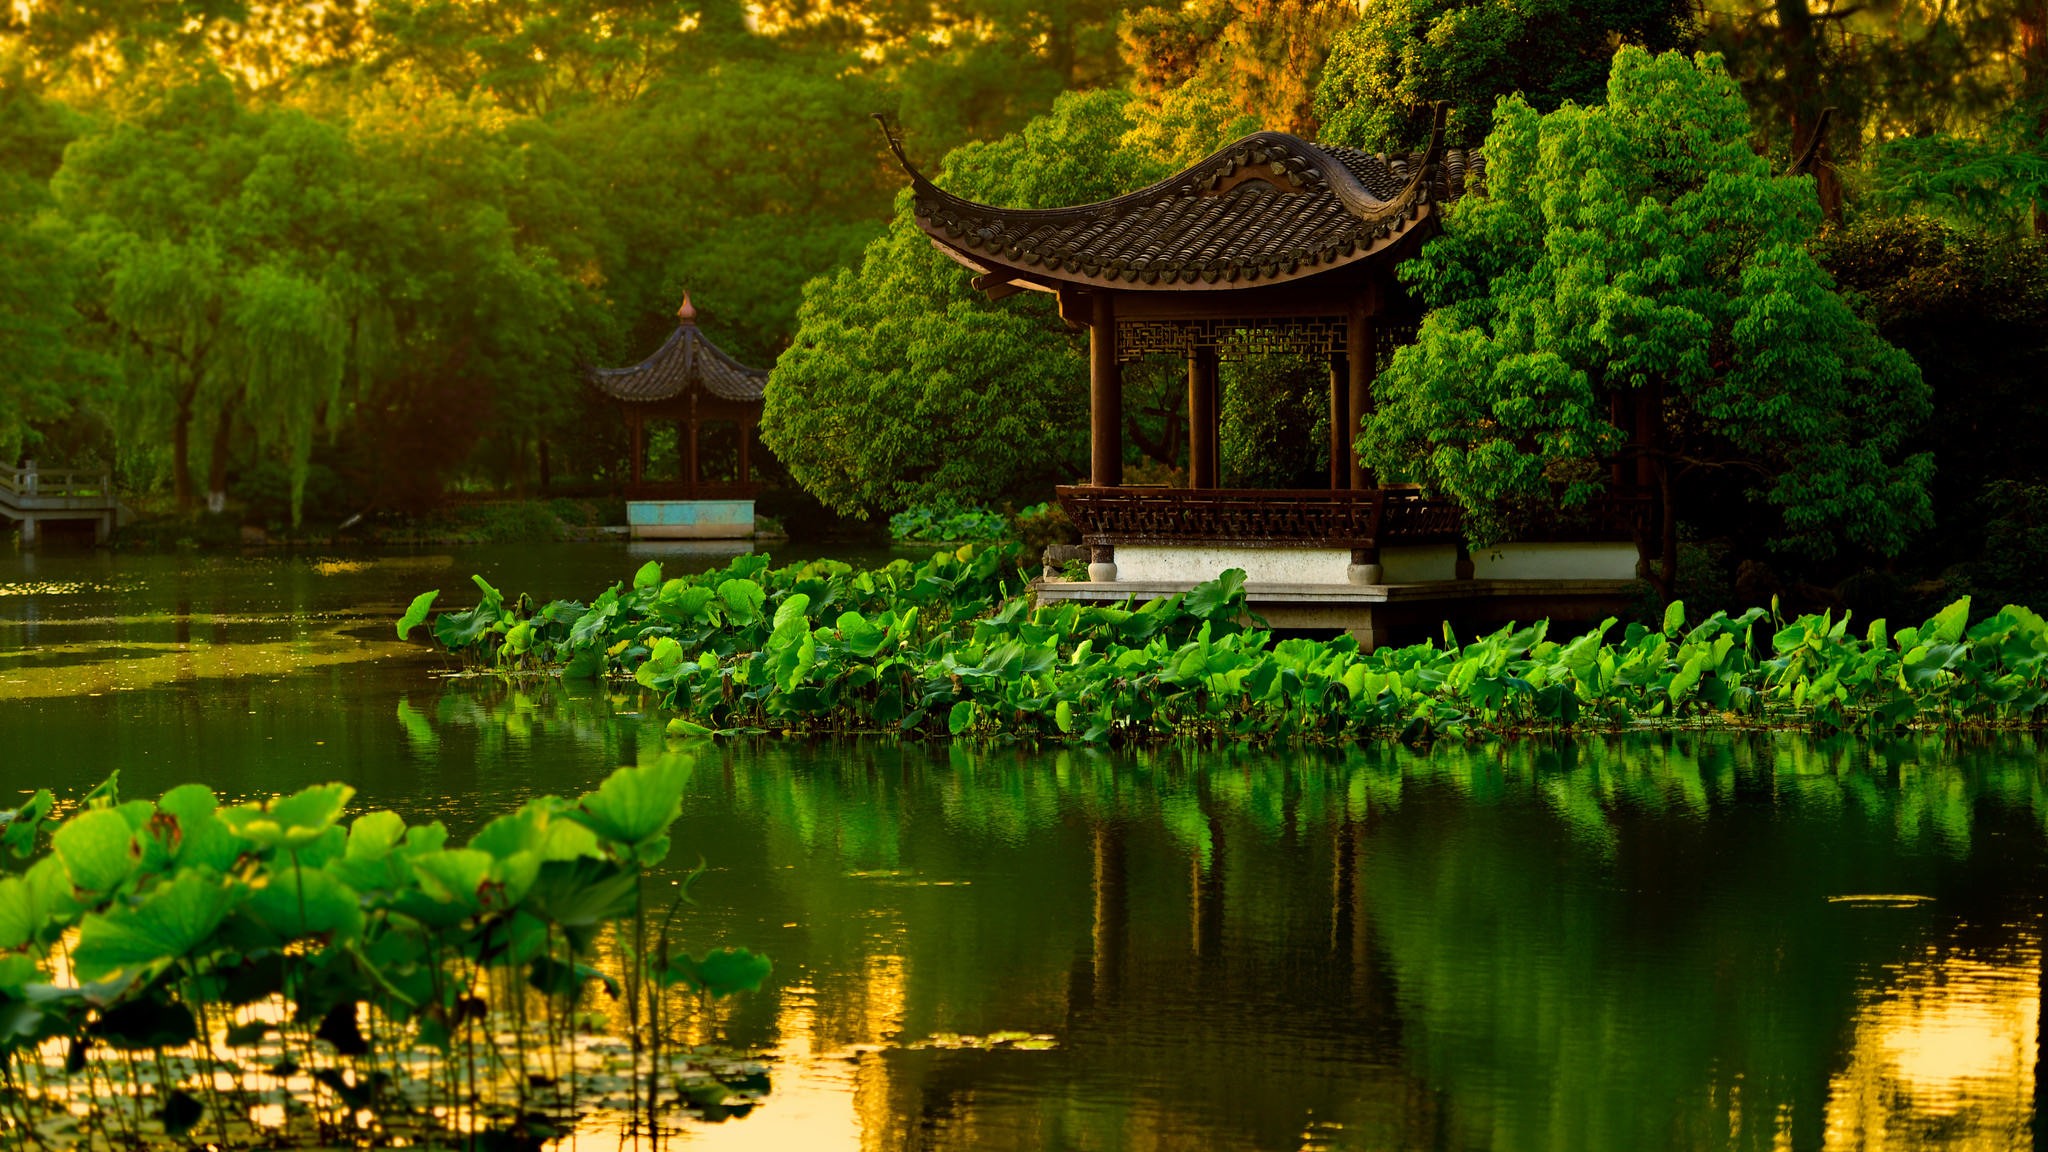 General 2048x1152 landscape lake Chinese architecture